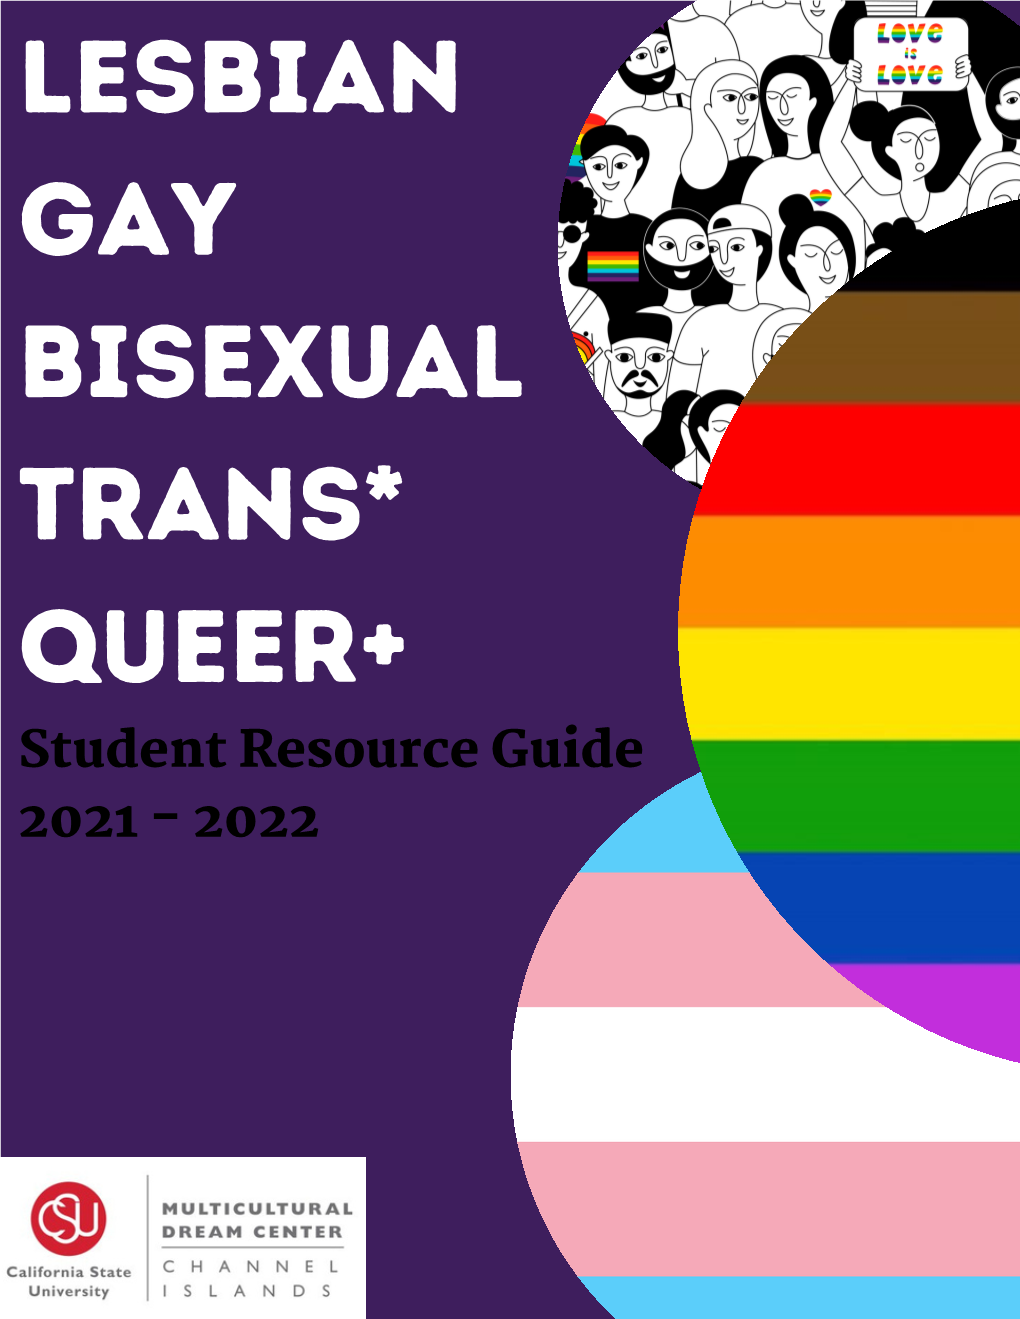 Lesbian, Gay, Bisexual, Trans*, Queer+ Student Resource Guide